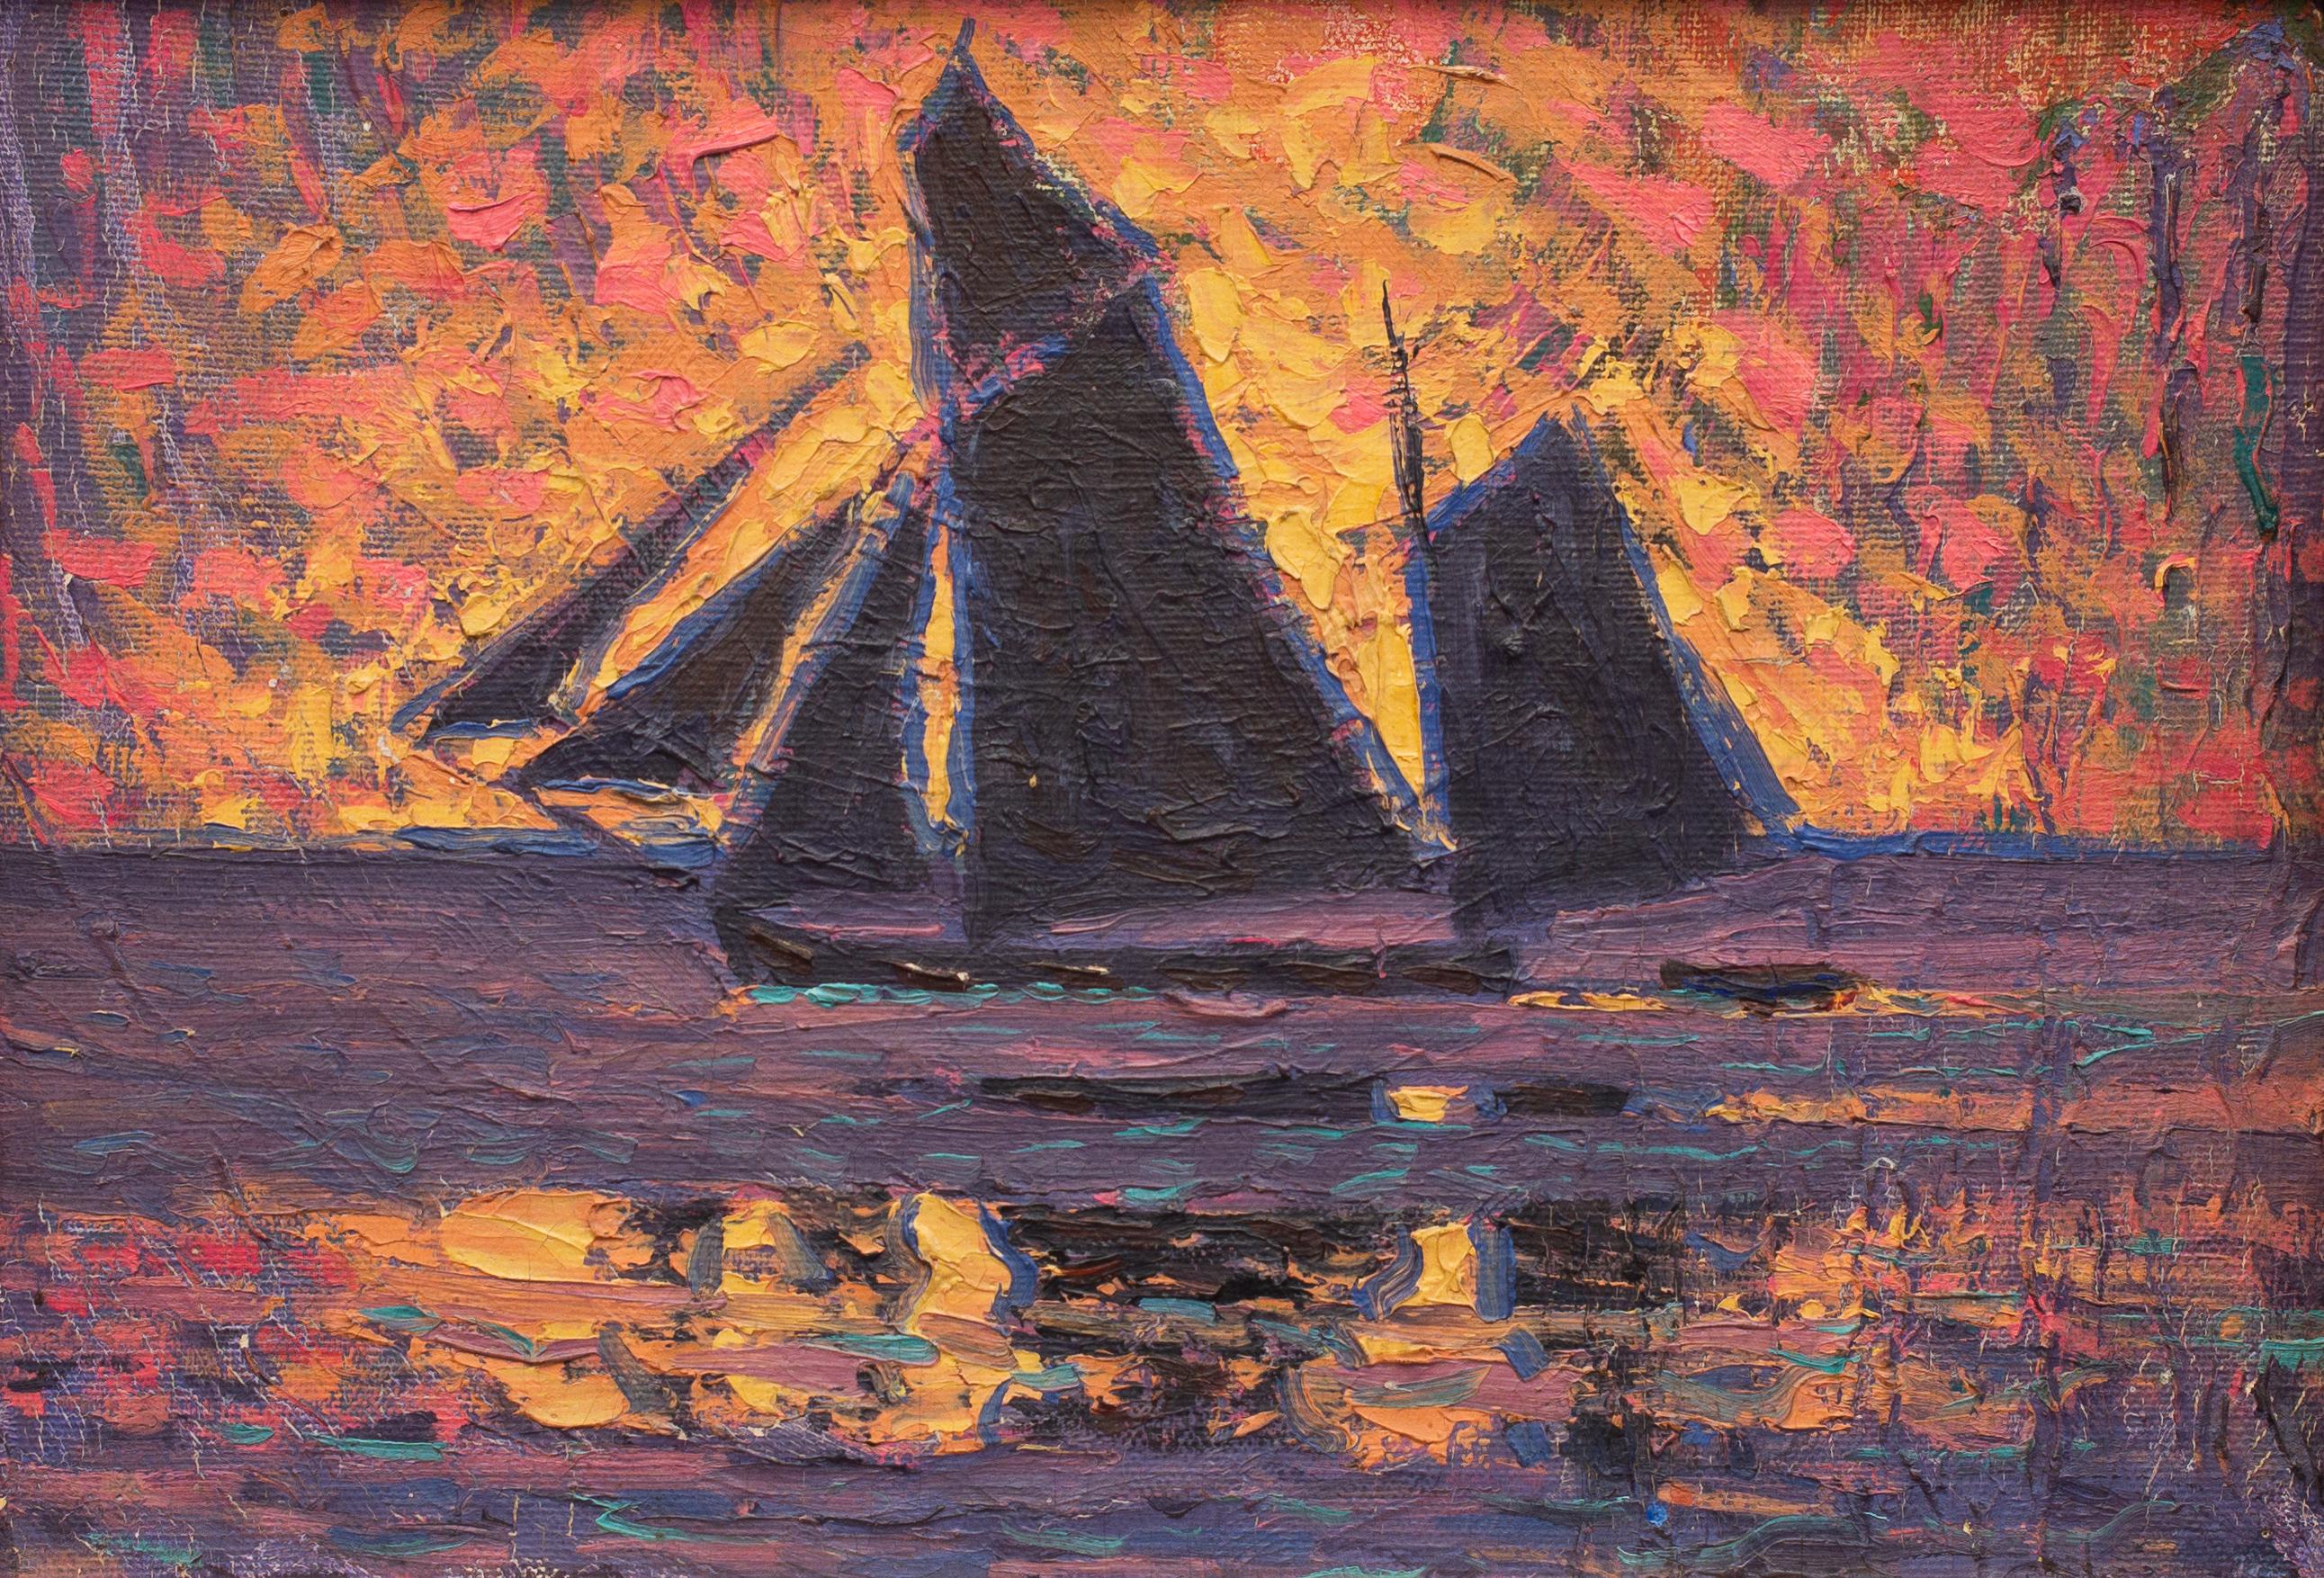 Olof Thunman (1879-1944) Swedish

A Sailboat

oil painting on masonite
c. 1920
board dimensions 20 x 28 cm 
frame 31 x 39.5 cm

Provenance: A Swedish Private Collection